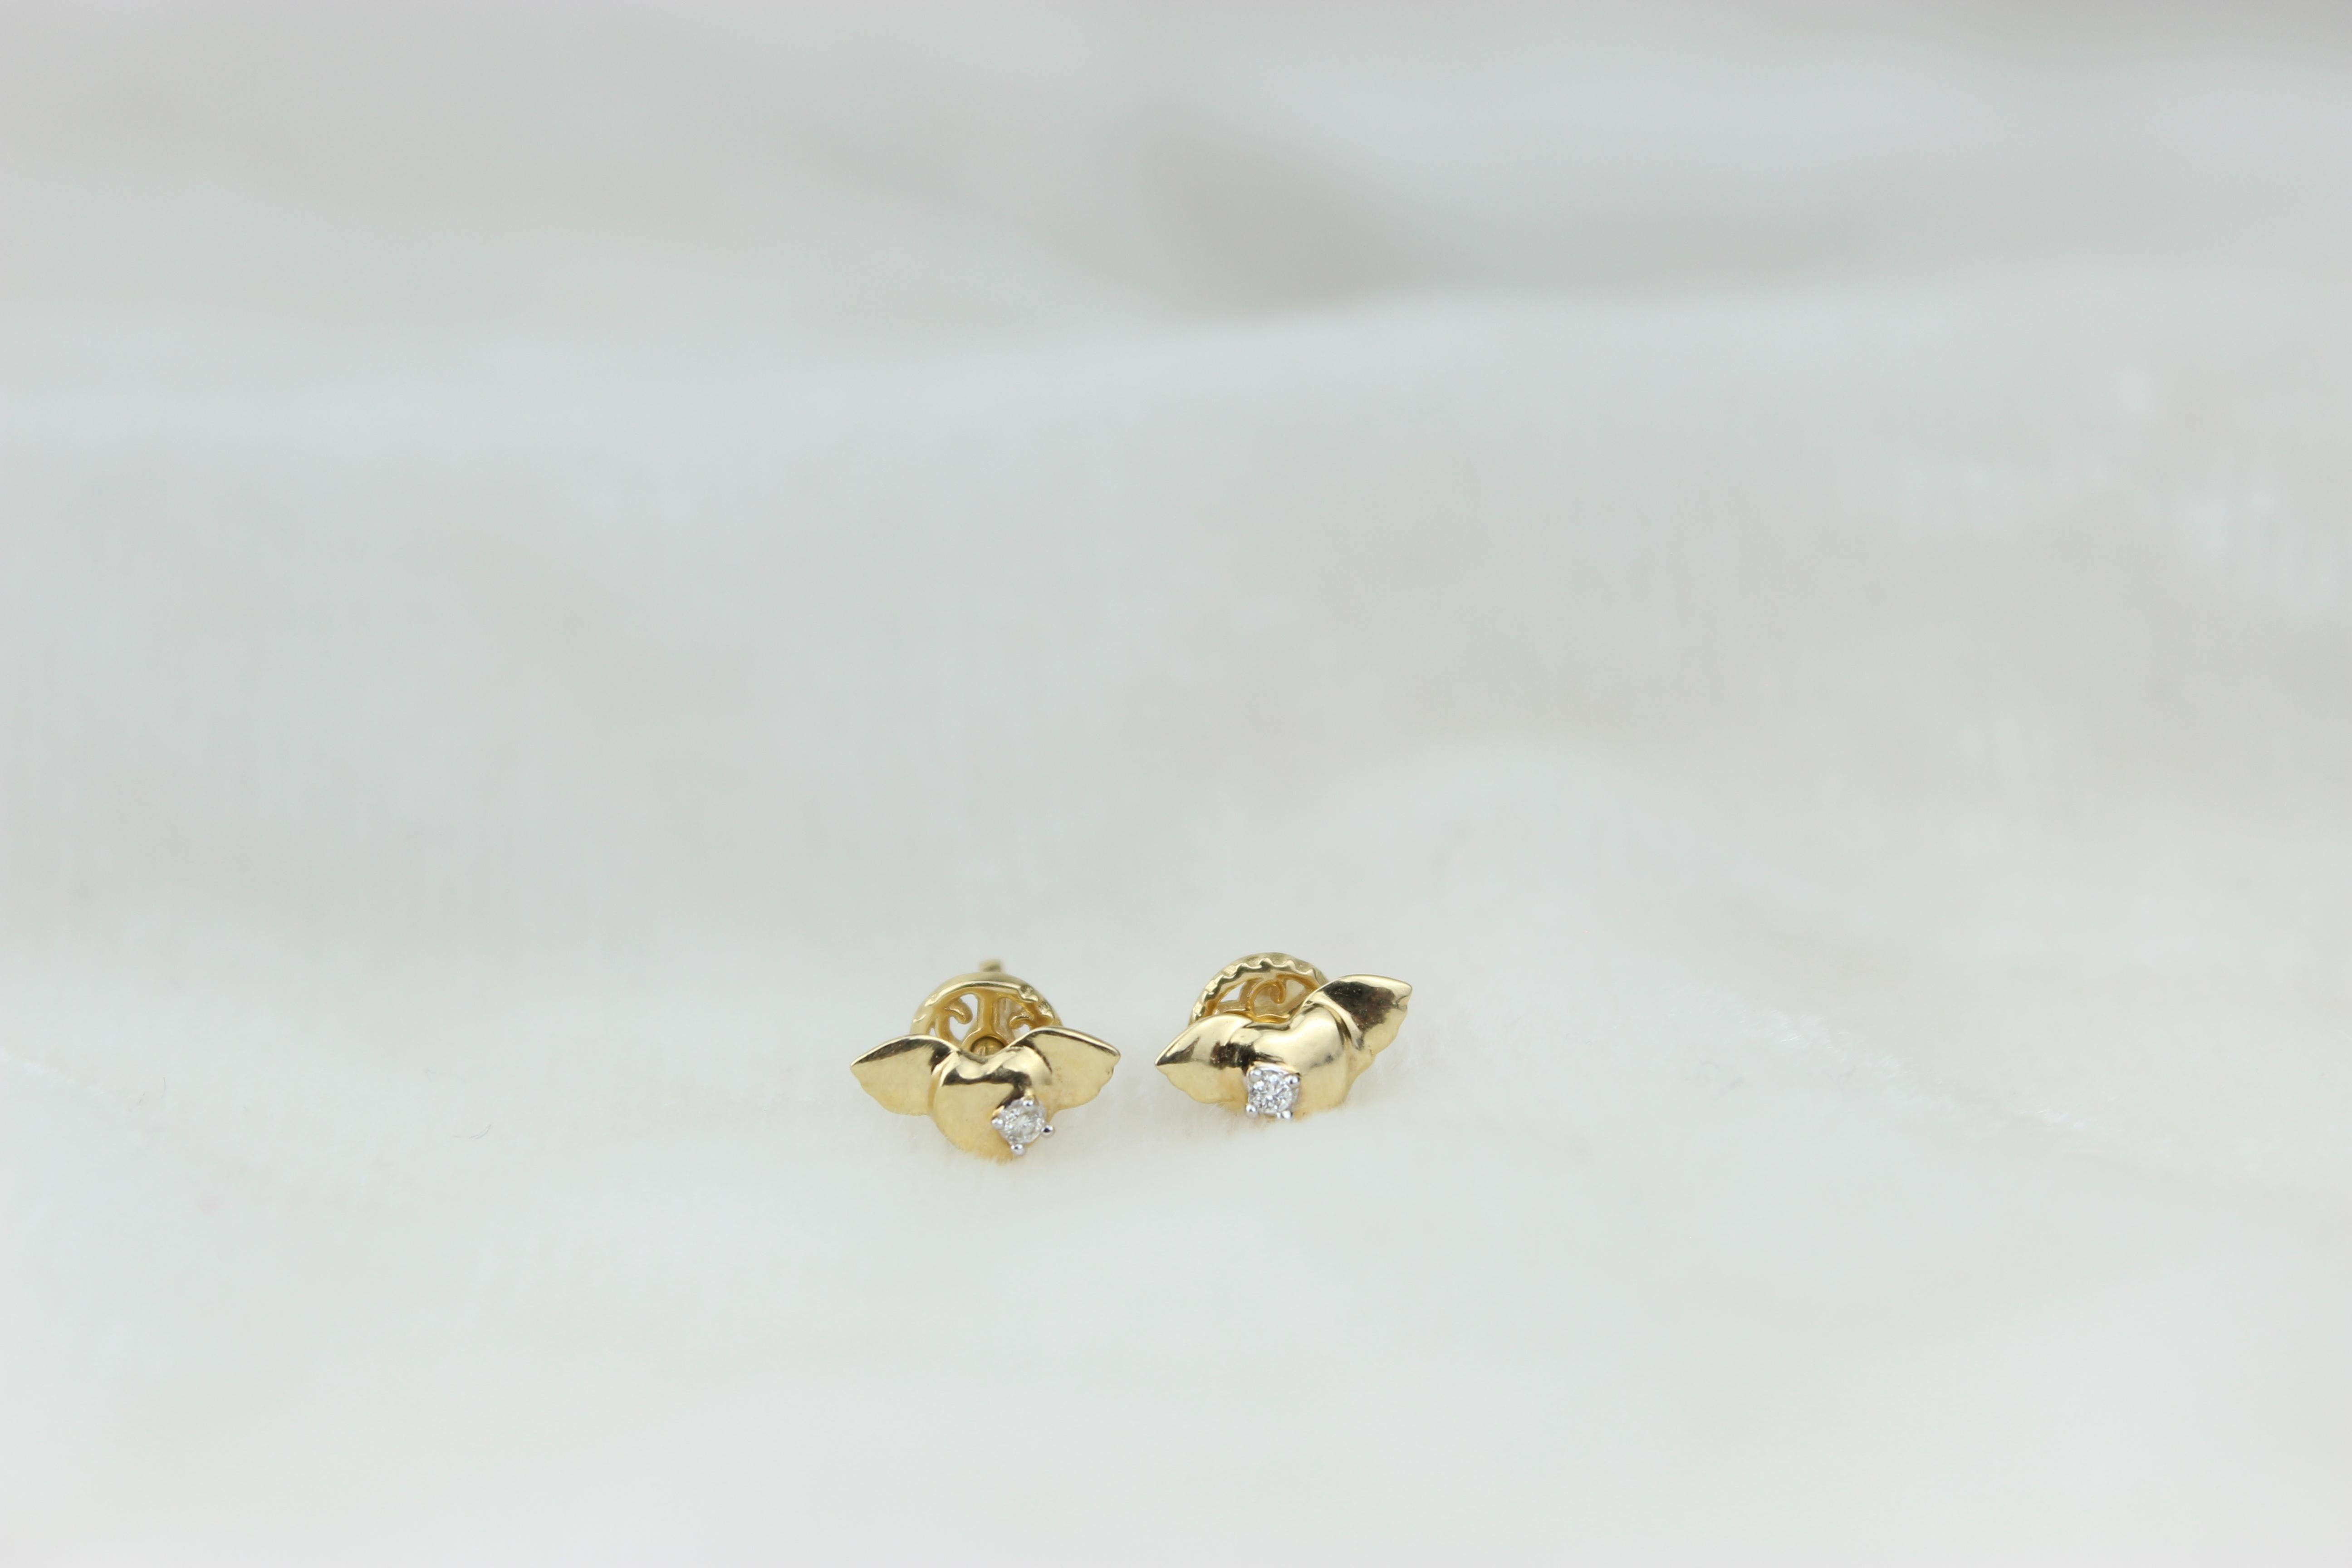 Winged Heart Diamond Earrings for Girls (Kids/Toddlers) in 18K Solid Gold are enchanting and delicate jewelry pieces designed specifically for young children. These earrings feature a charming winged heart design crafted from high-quality 18K solid